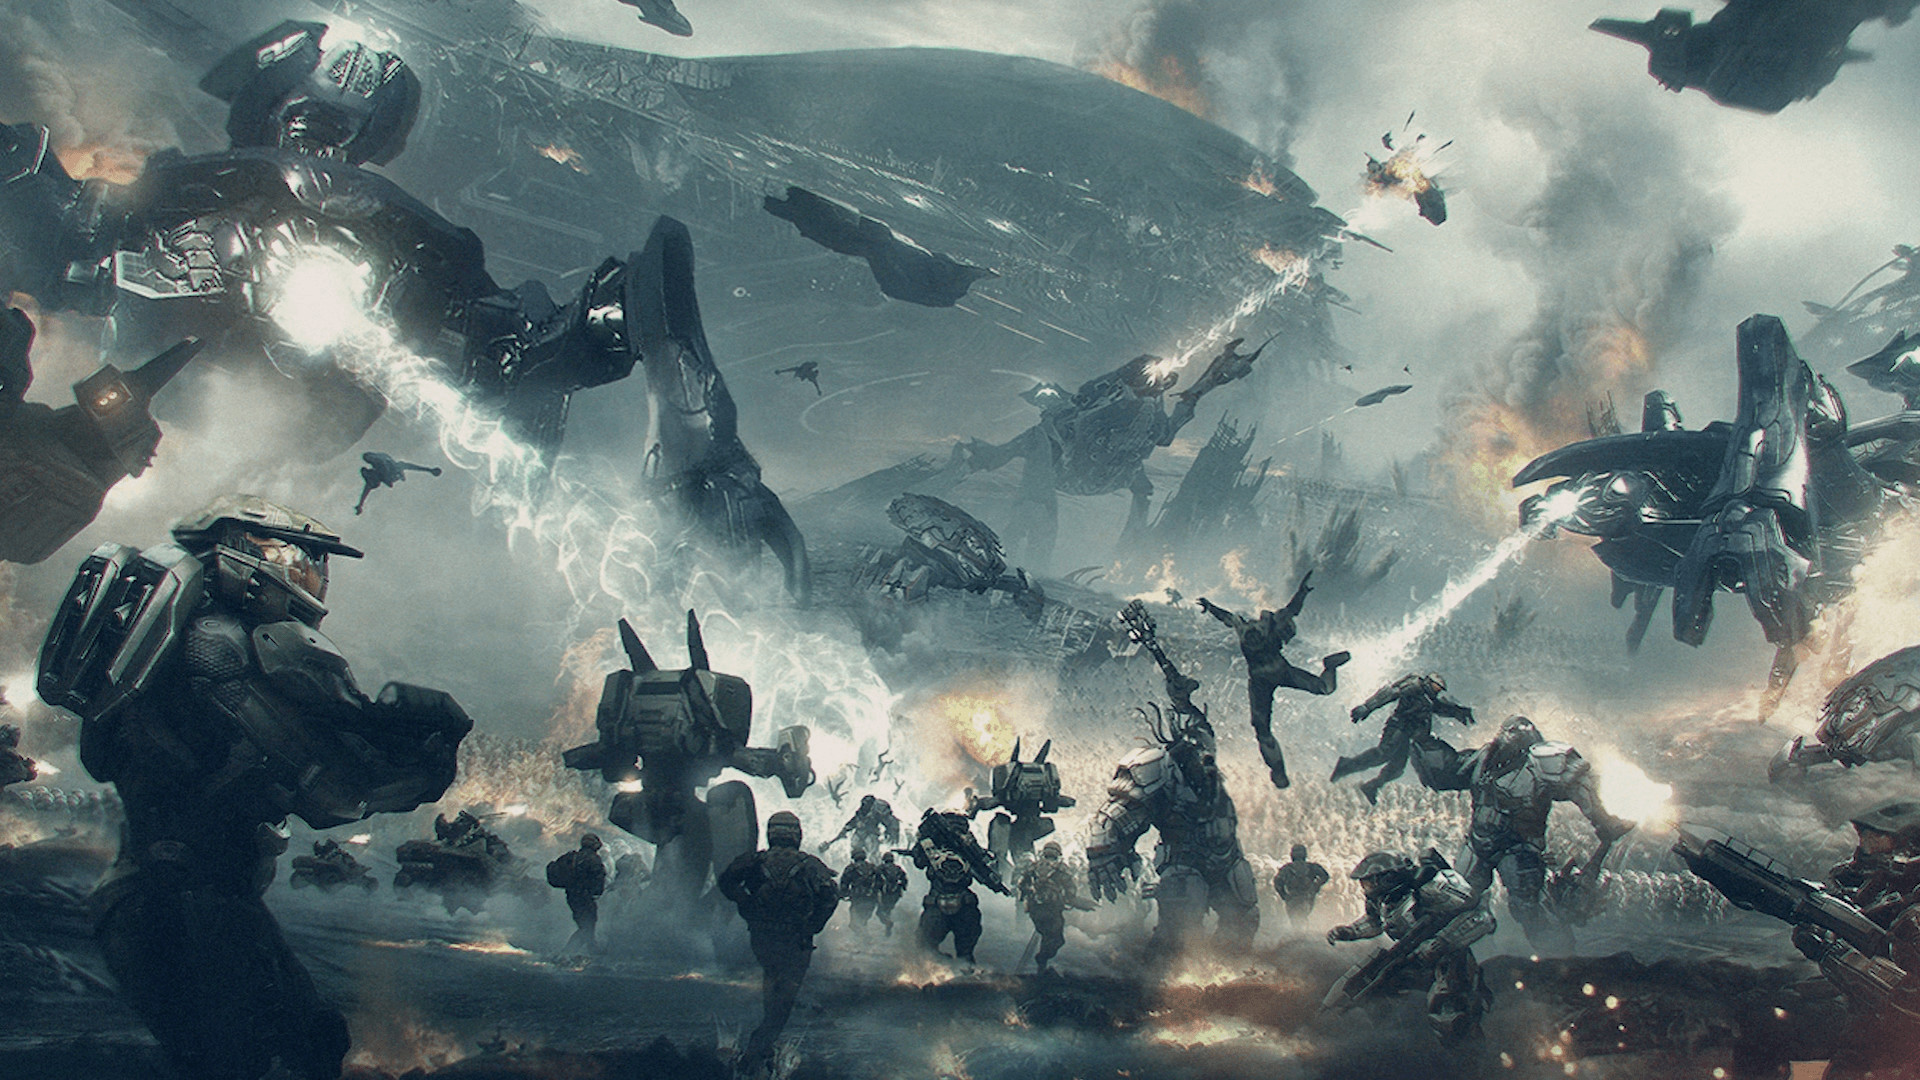 1920x1080 HD Halo Wars Wallpapers and Photos HD Games Wallpapers | wallpapers .